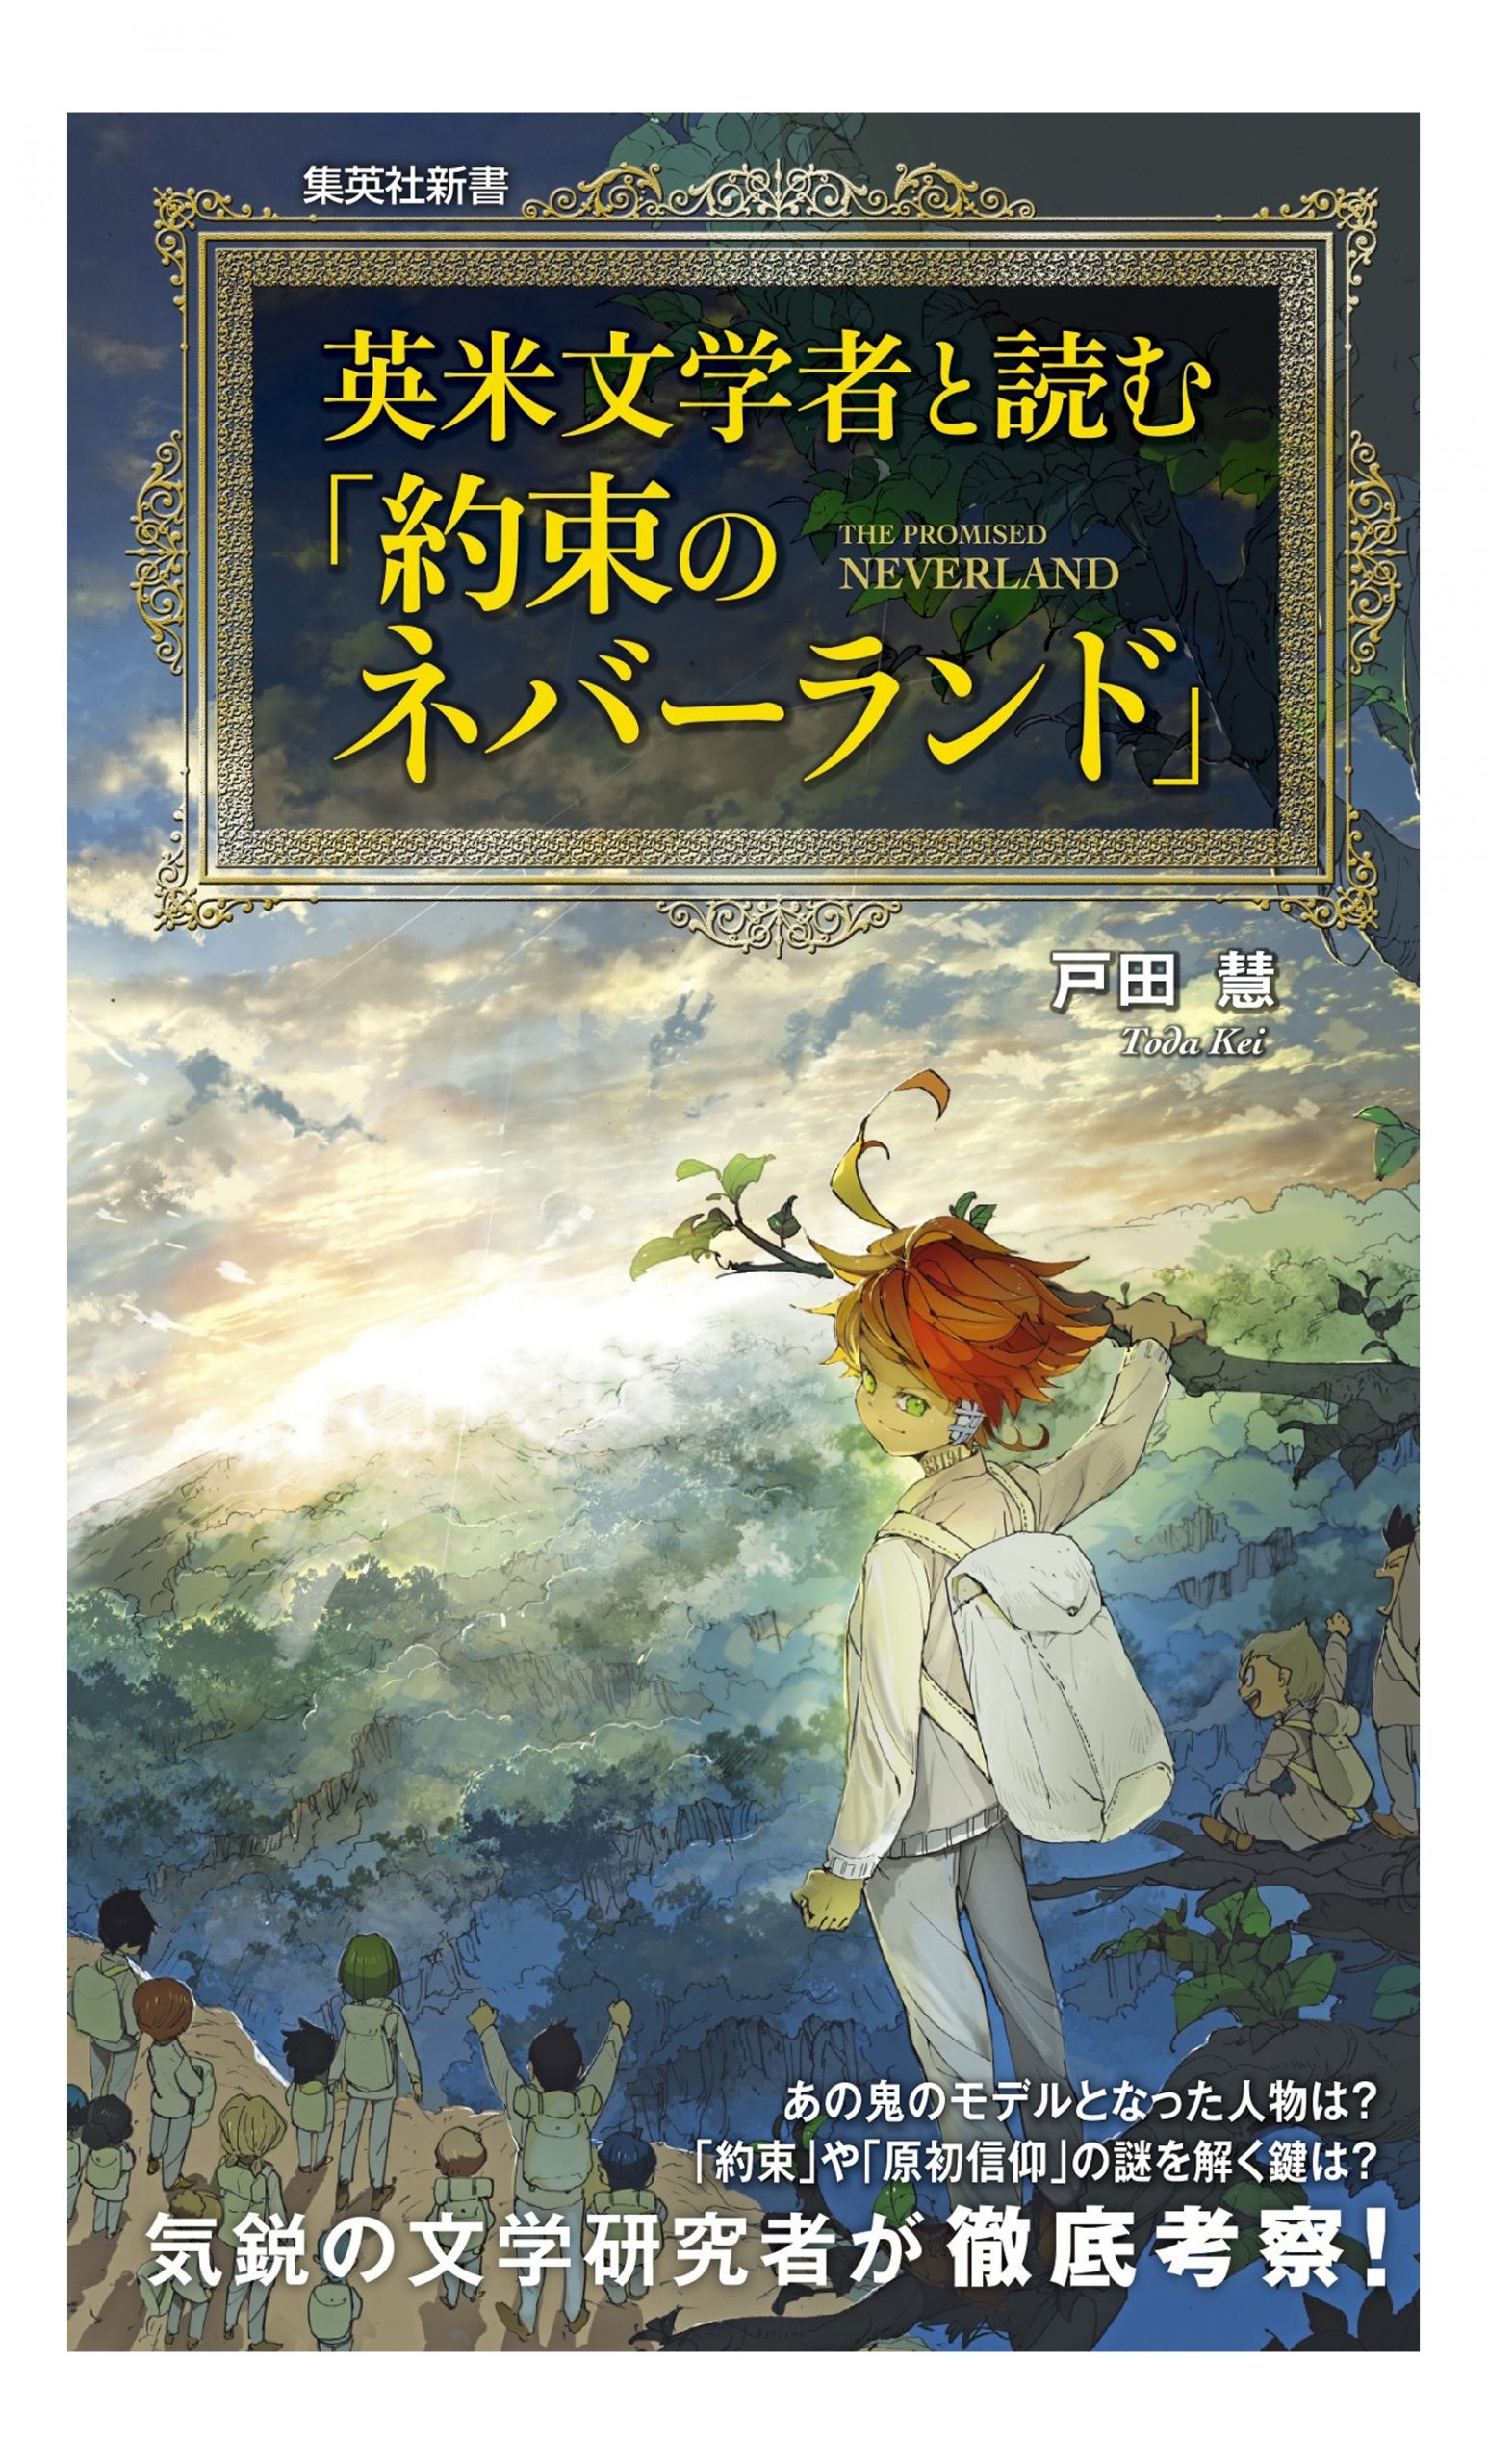 Capa do livro Reading The Promised Neverland with a British/American Literature Scholar